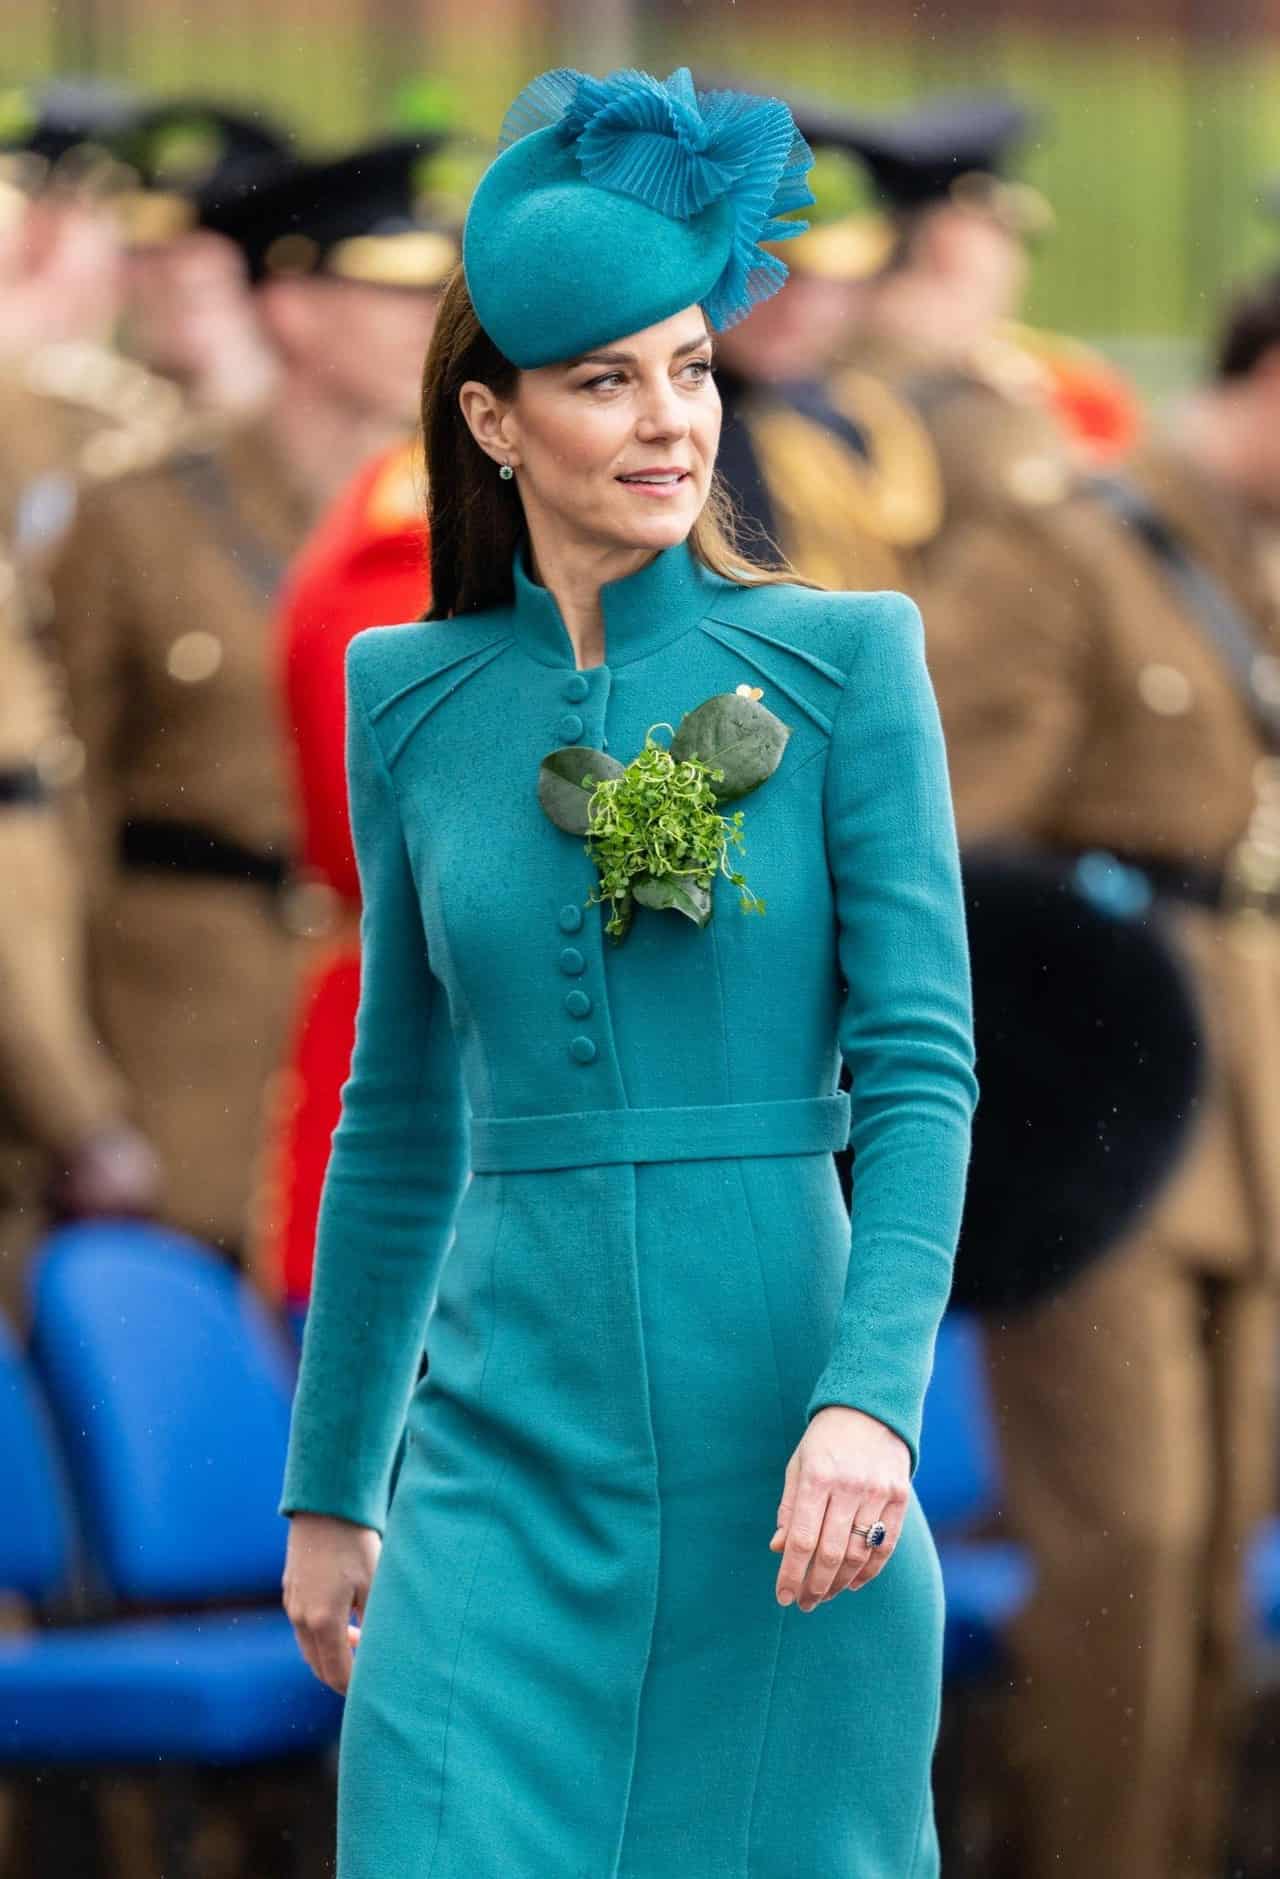 Kate Middleton Stuns in Turquoise Look at St. Patrick’s Day Parade